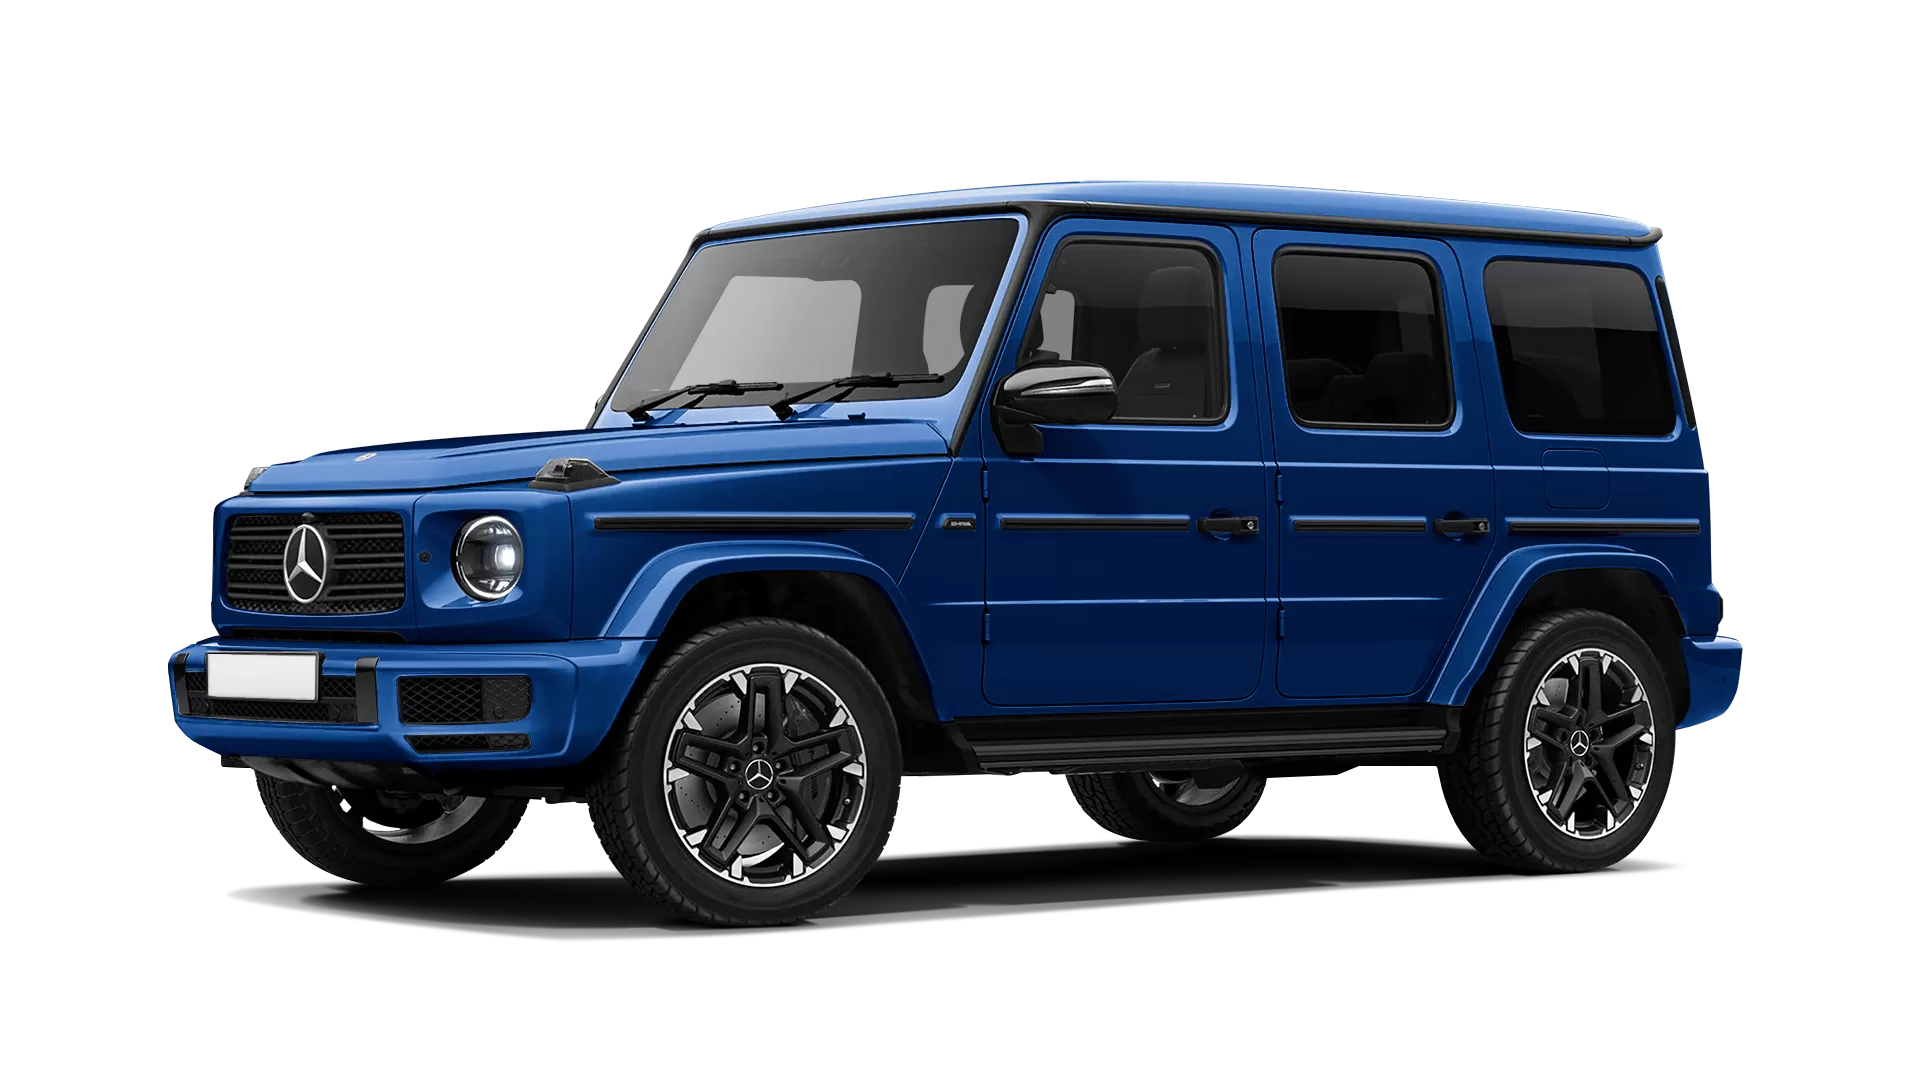 Mercedes G class W463 stock front view in Brilliant Blue color